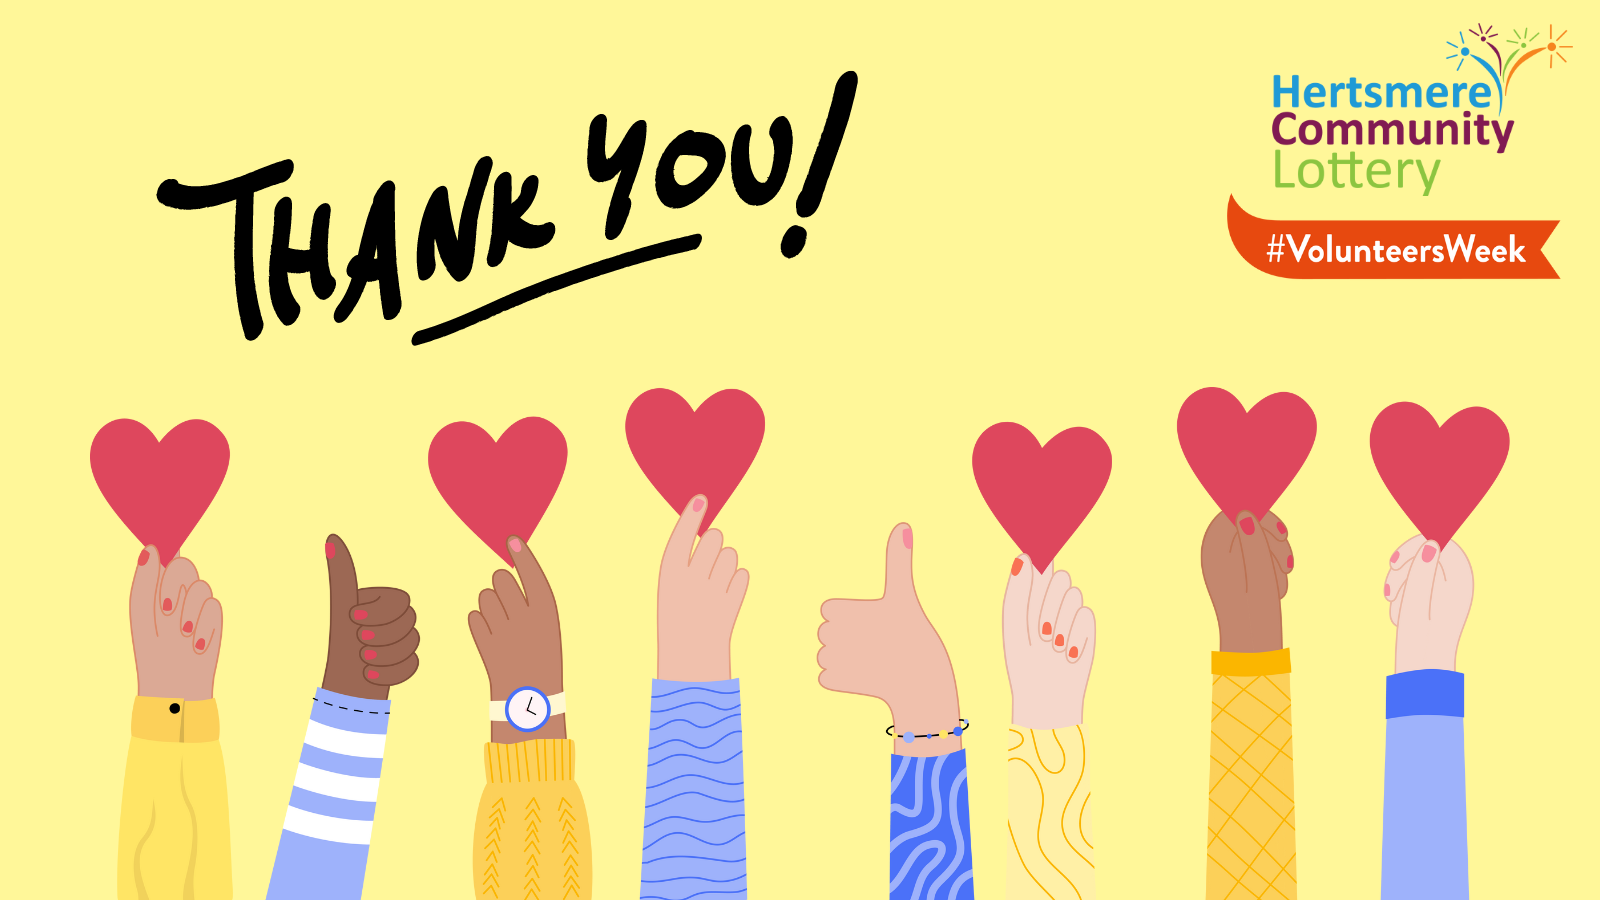 Cartoon hands holding up hearts & thumbs up. Text says 'Thank You!'. Hertsmere Community Lottery logo & Volunteers week logo